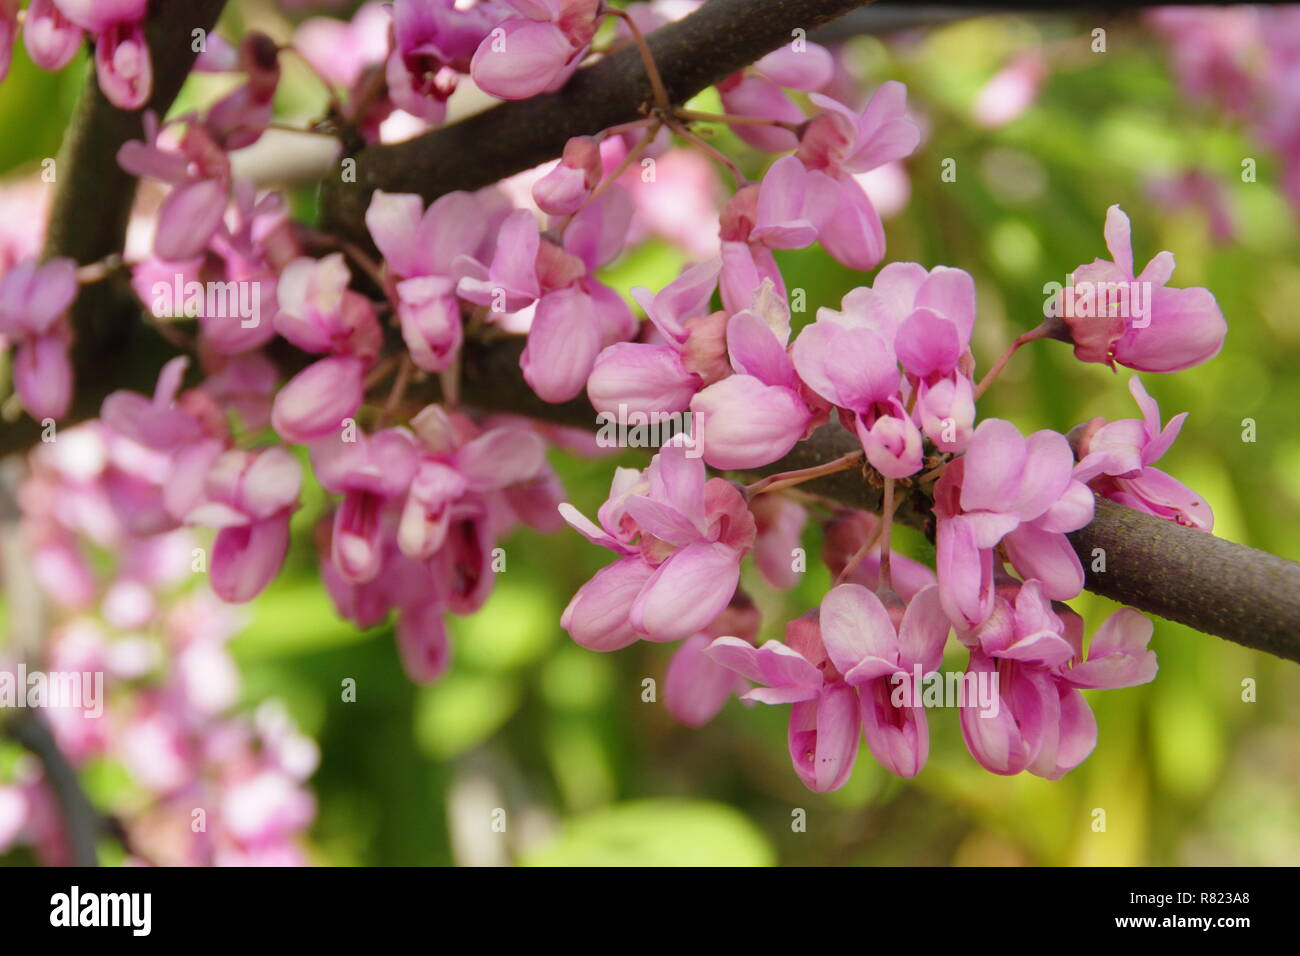 Spring blossoms of Cercis siliquastrum, also called  the Judas tree, flowering in May, UK garden Stock Photo